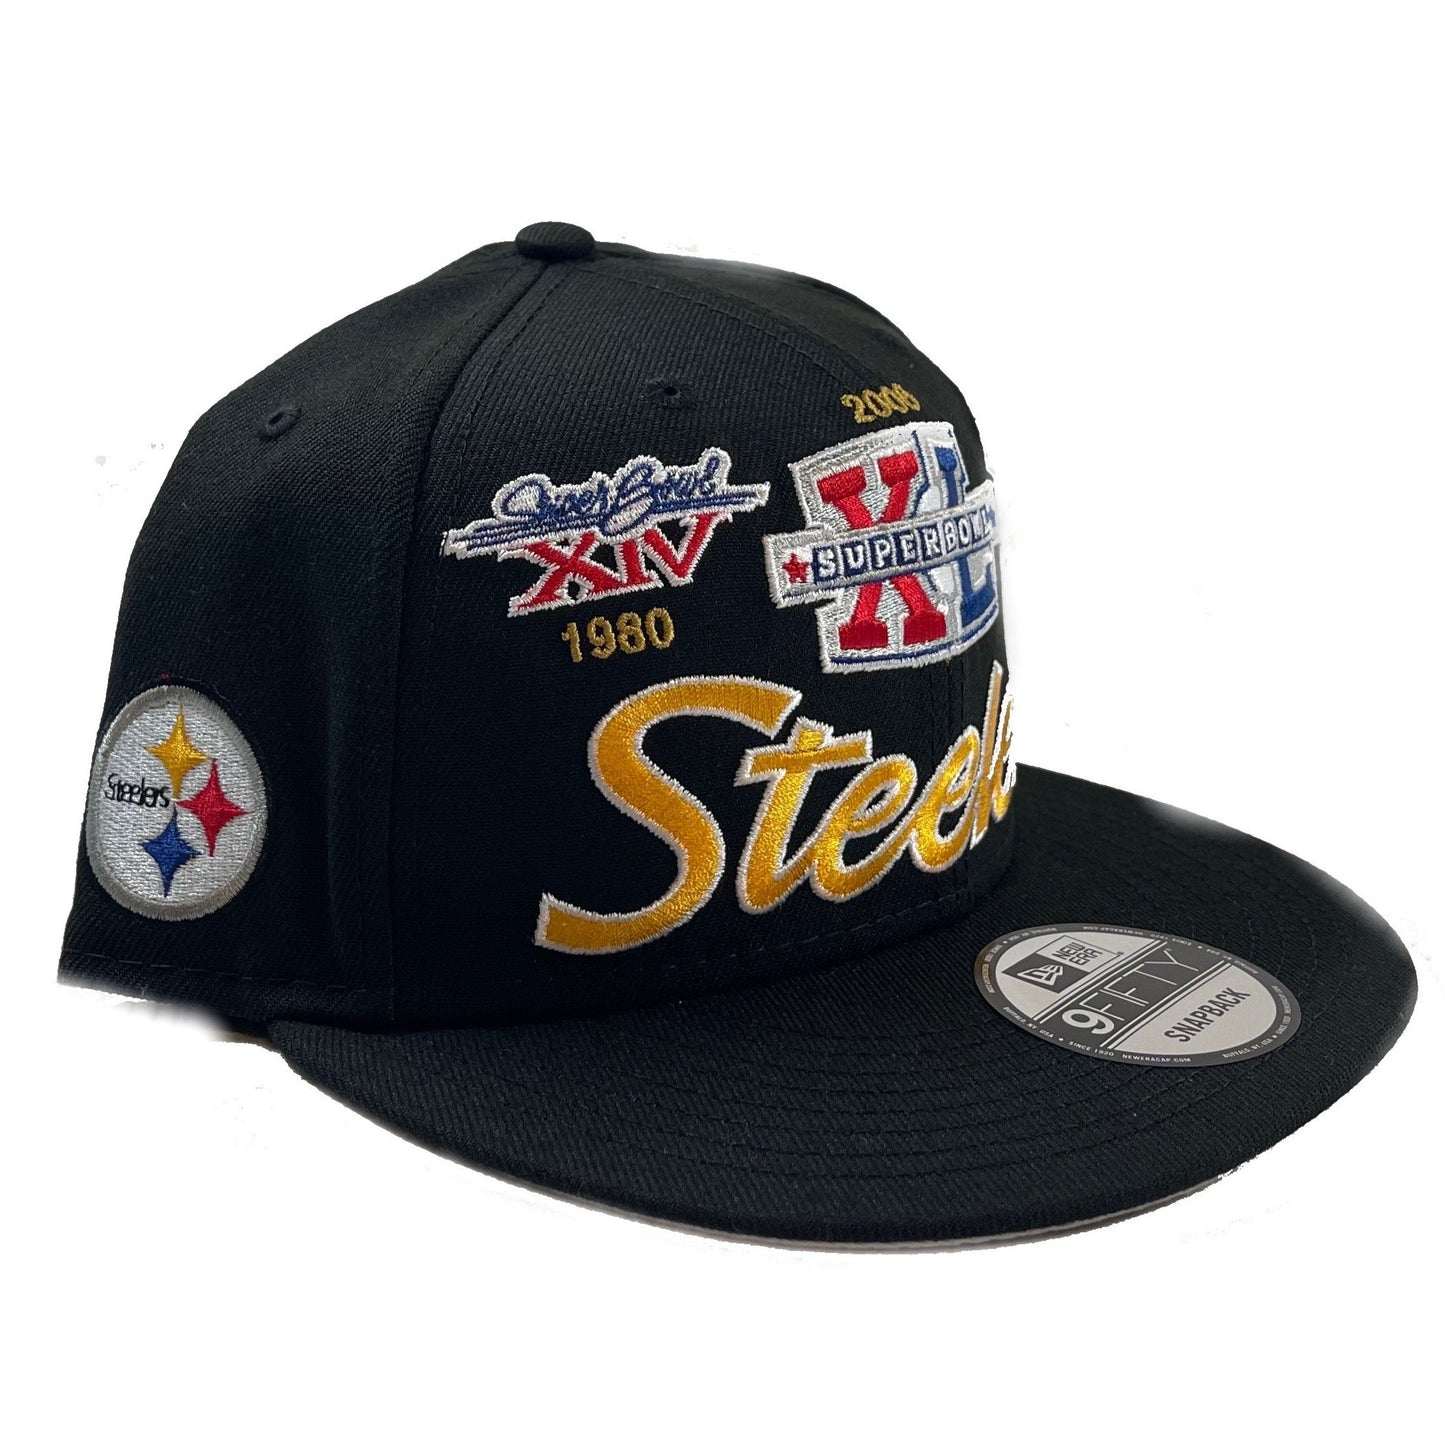 Pittsburgh Steelers Patches (Black) Snapback